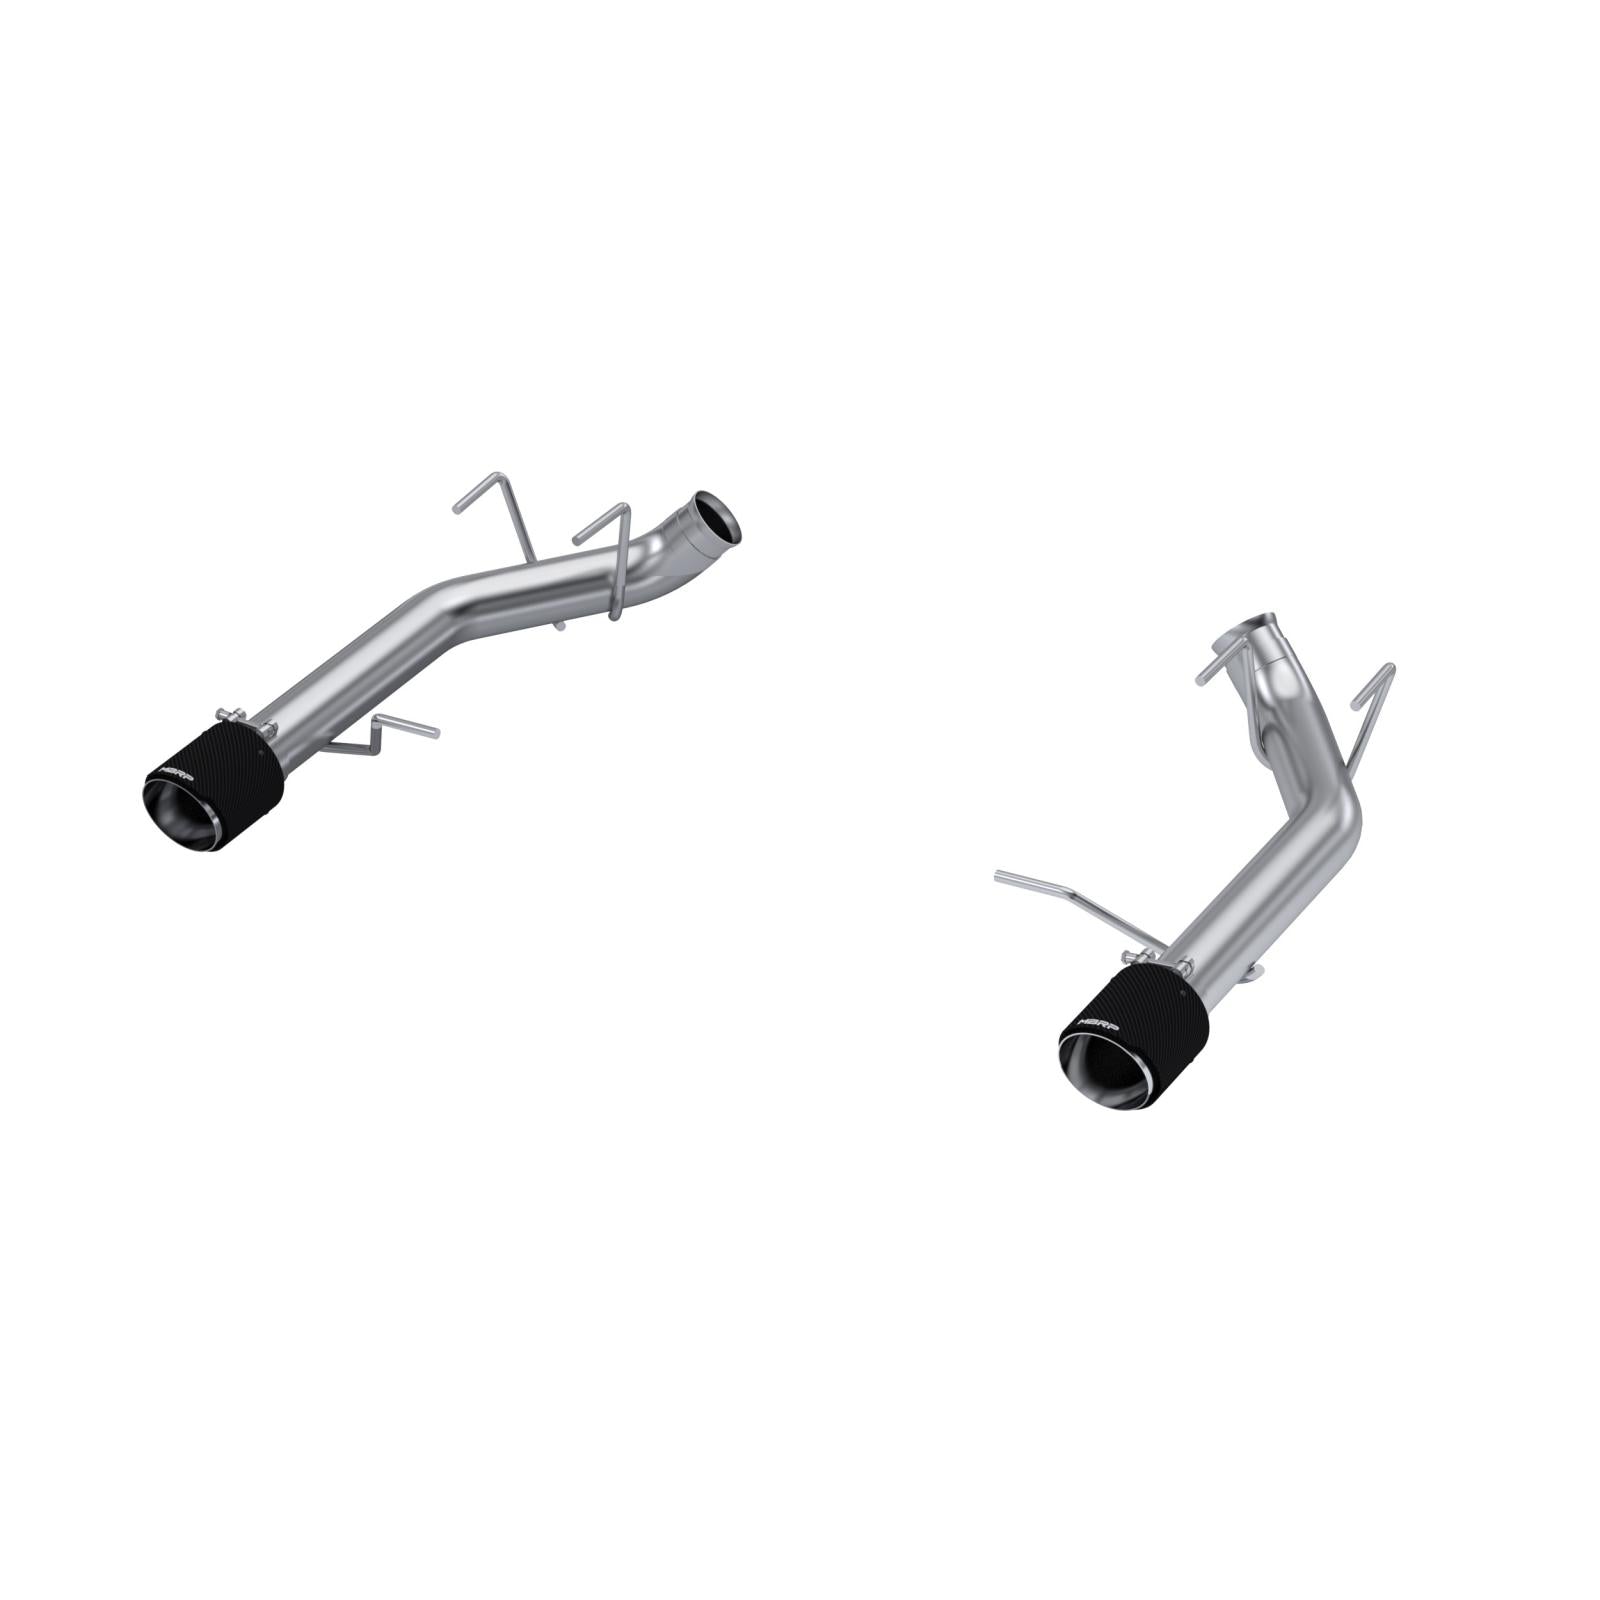 MBRP Exhaust 2011-2014 Ford Mustang GT 5.0L T304 Stainless Steel 3 Inch Axle-Back with Carbon Fiber Tips, Race Version, MBRP S72033CF